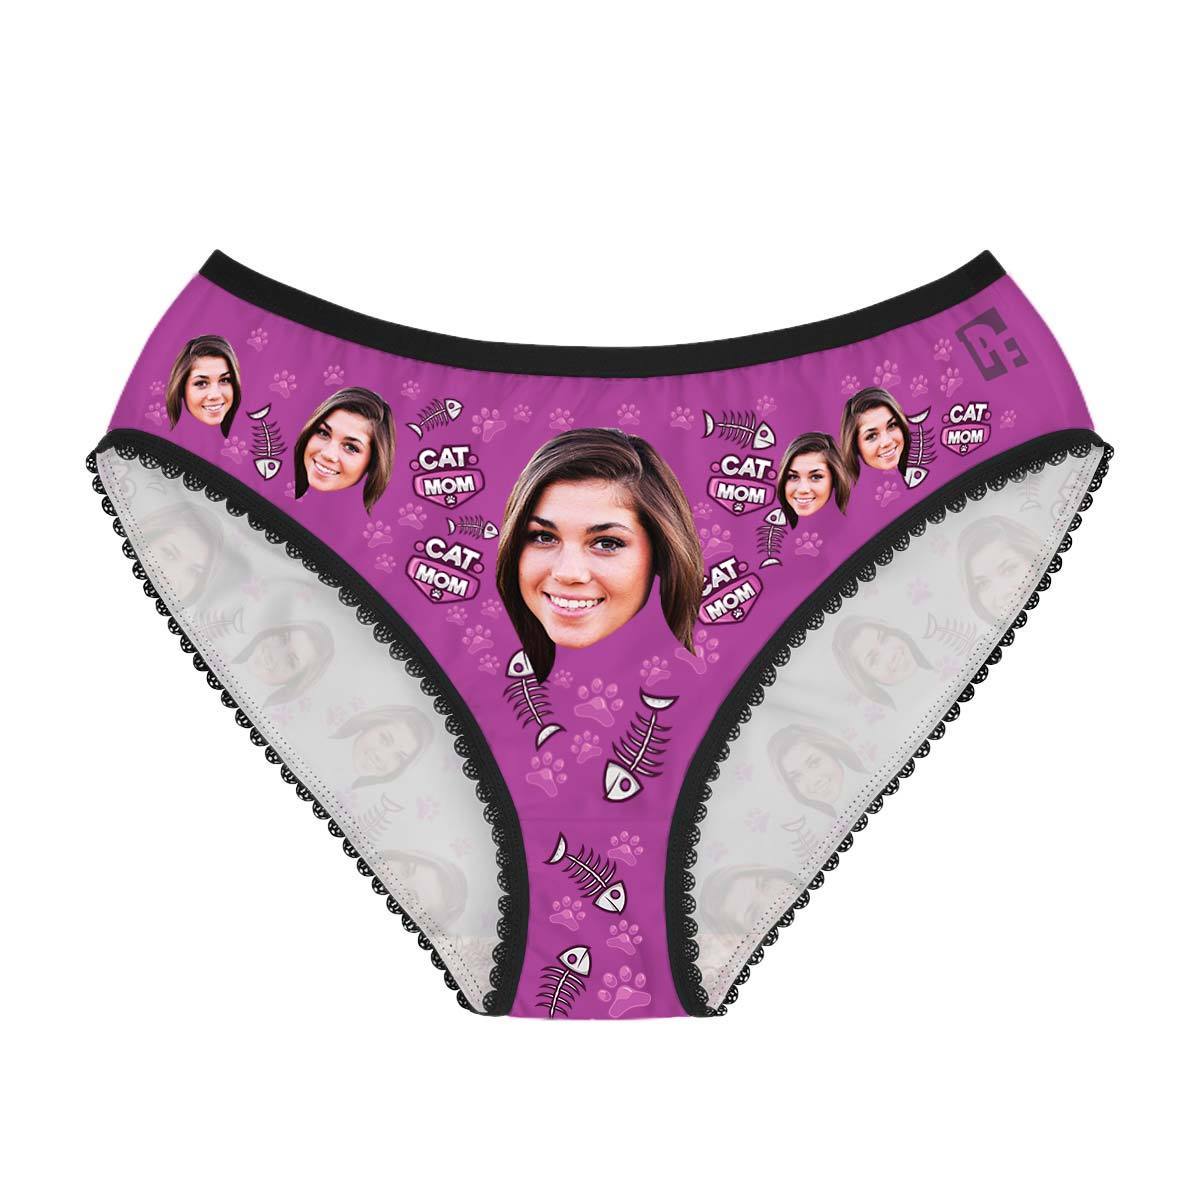 Purple Cat Mom women's underwear briefs personalized with photo printed on them